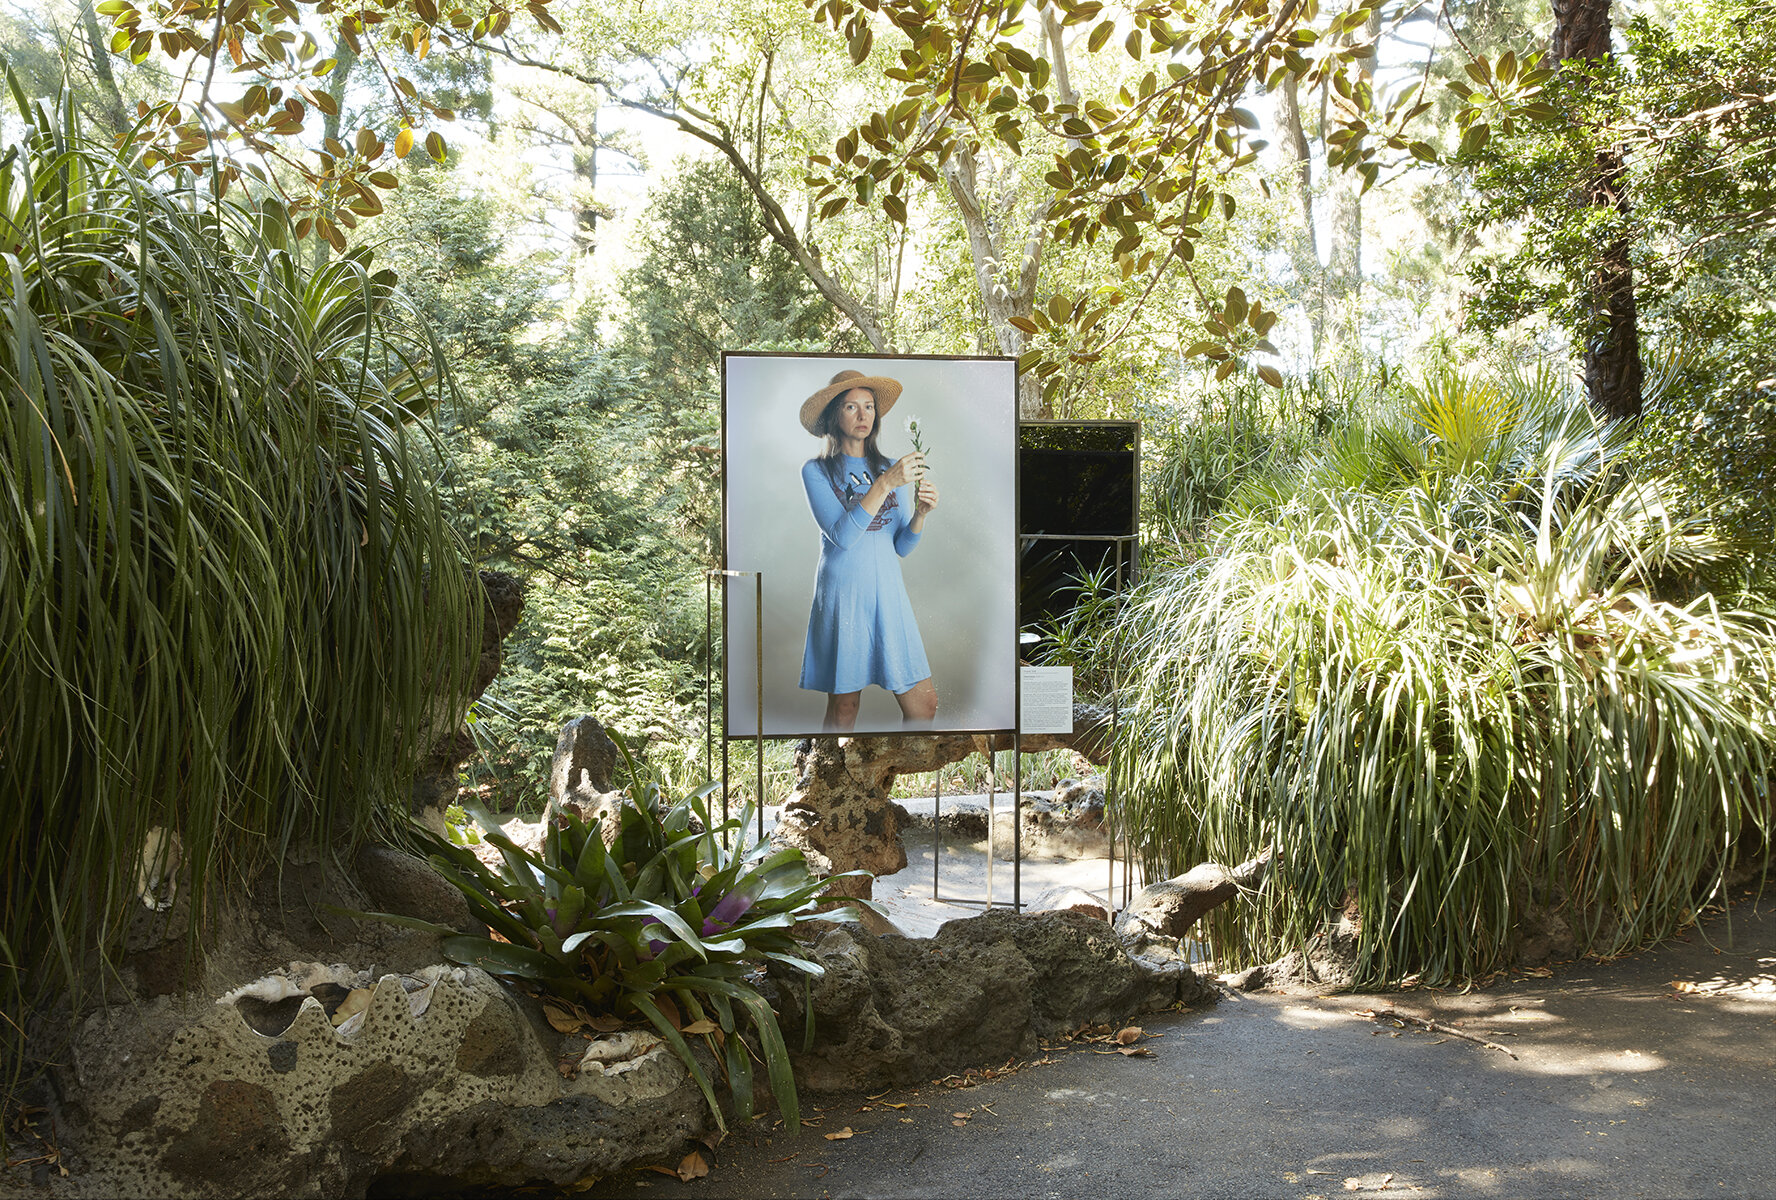  This series was commissioned by Royal Botanic Gardens Victoria as part of PHOTO 2021 International Festival of Photography. Installation images by Zan Wimberley. 